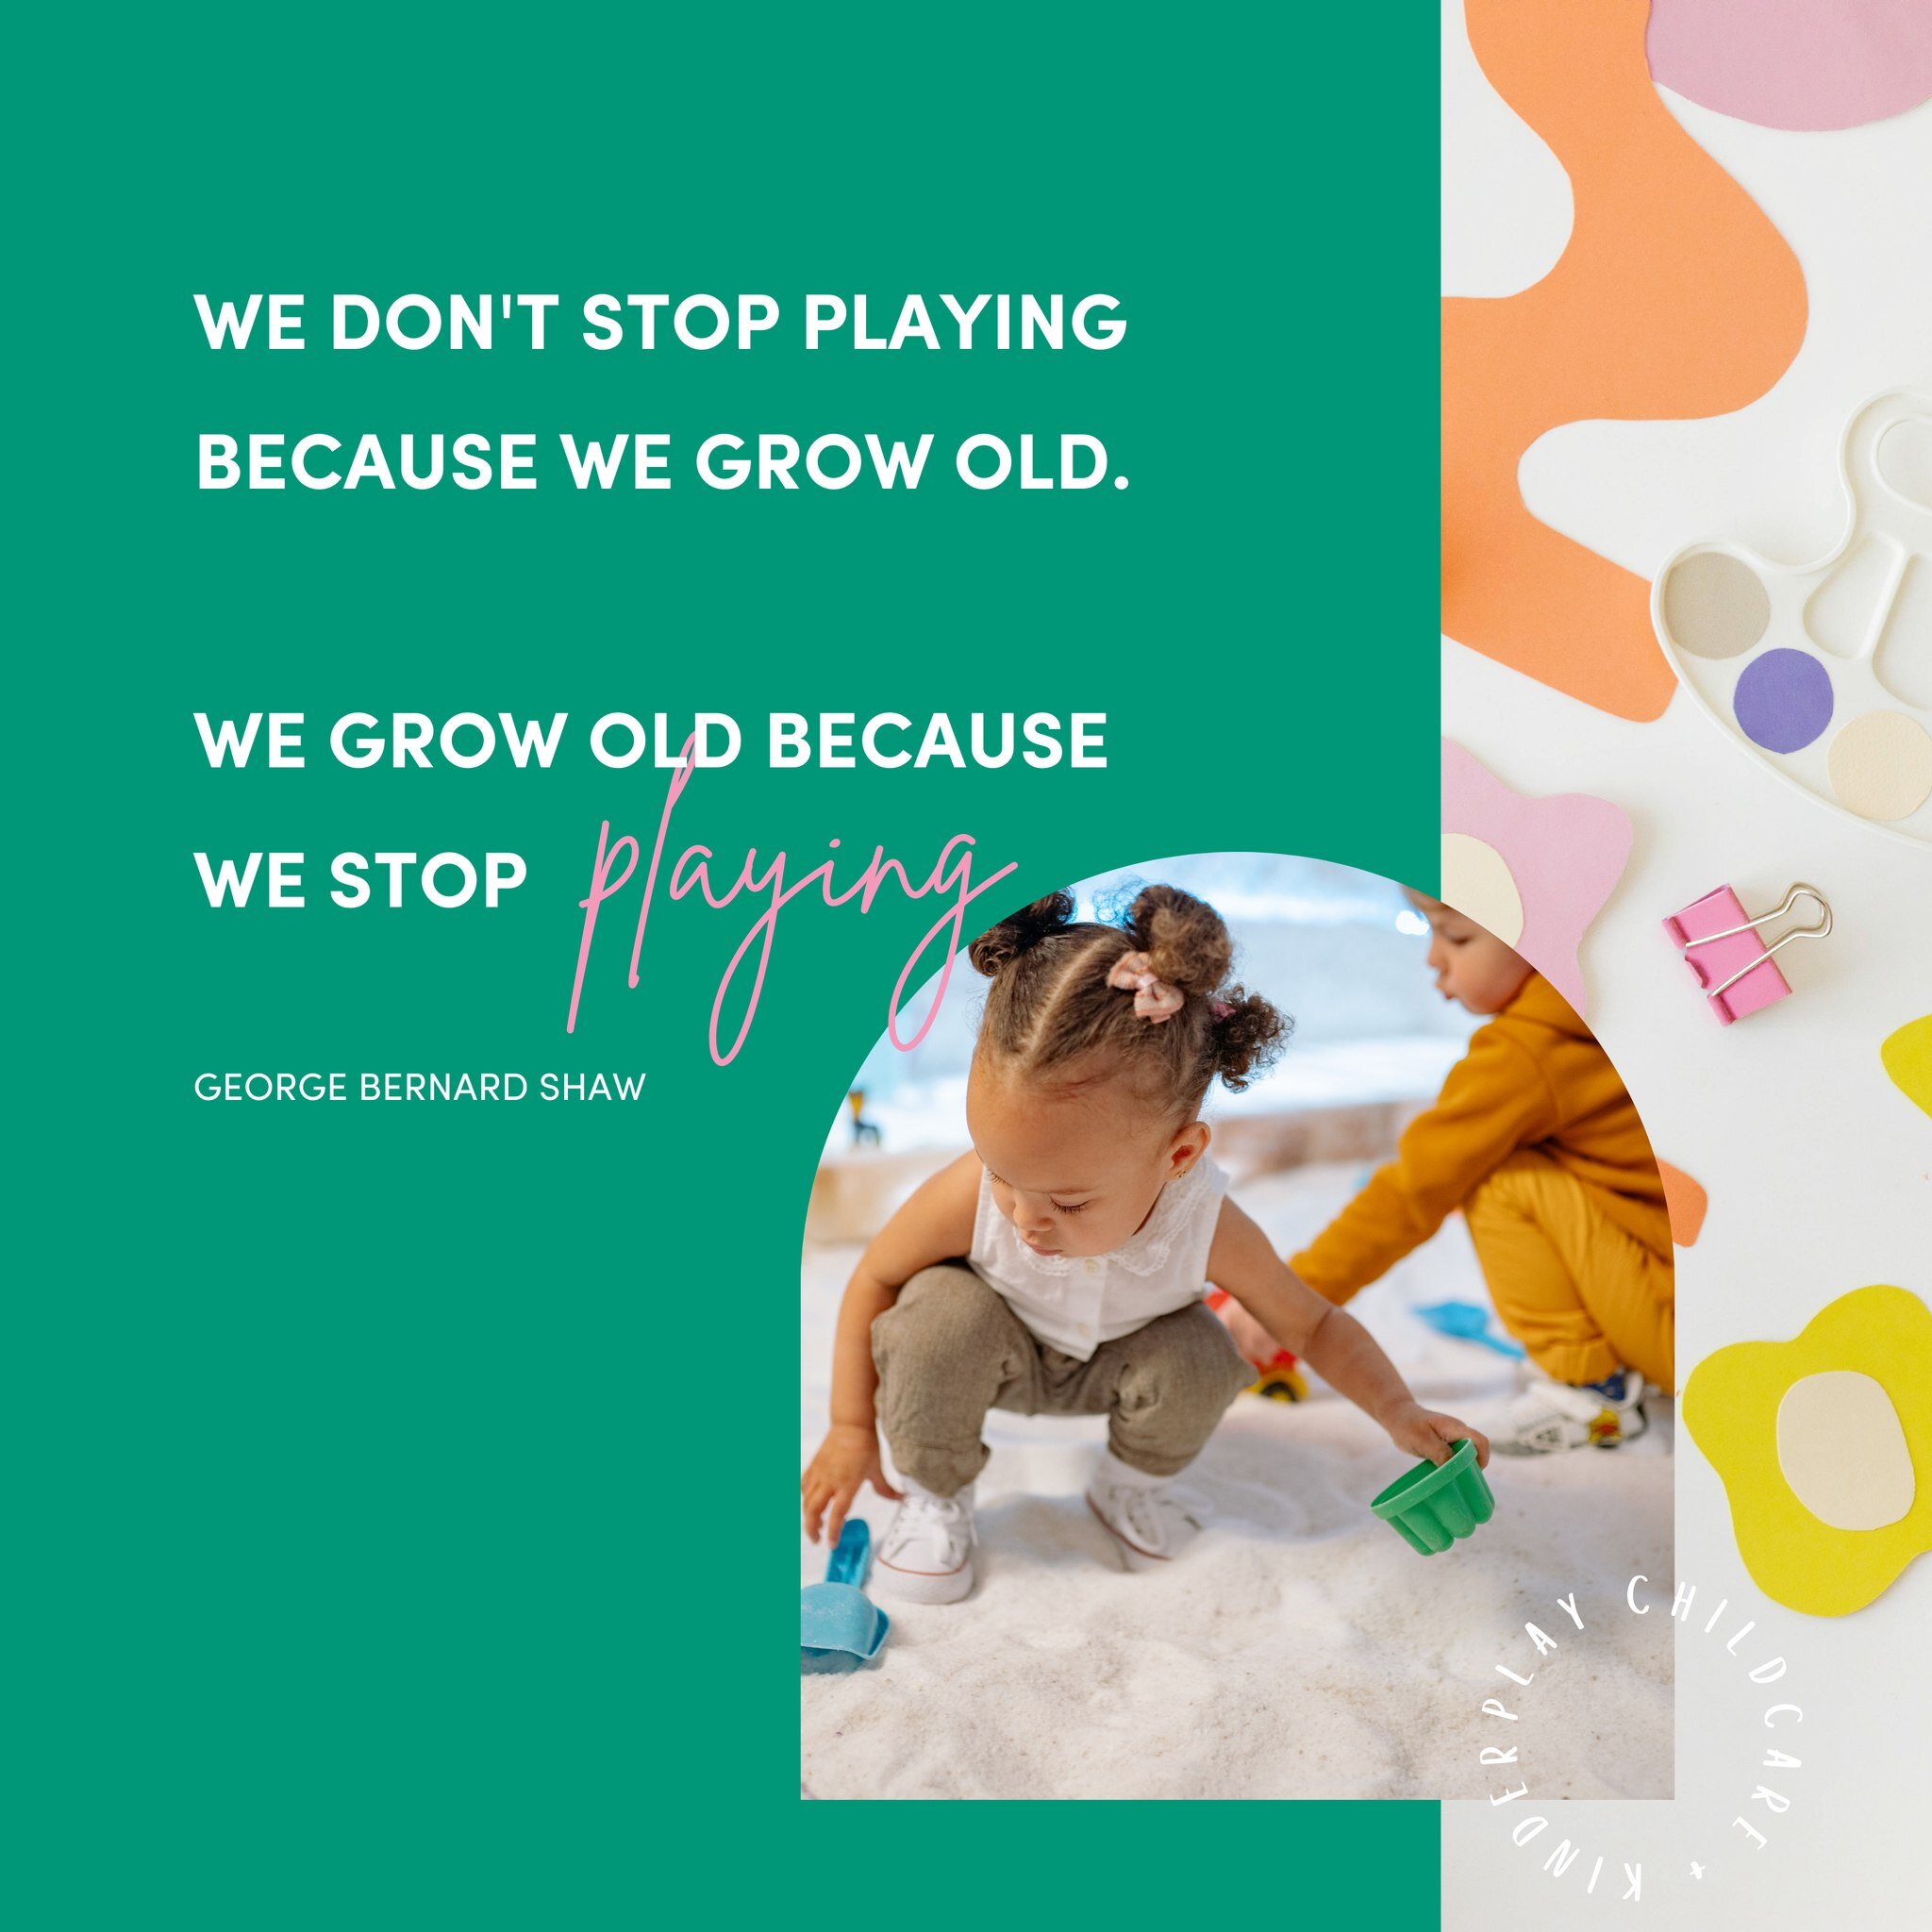 Just a little Monday morning motivation to get out there and PLAY! 🤸

#play #playchildcare #playchildcare&amp;kinder #learningthroughplay #playbasedlearning #playactivities #playkinder #bayswater #bayswaterchildcare #bayswatervic #highpoingshoppingc